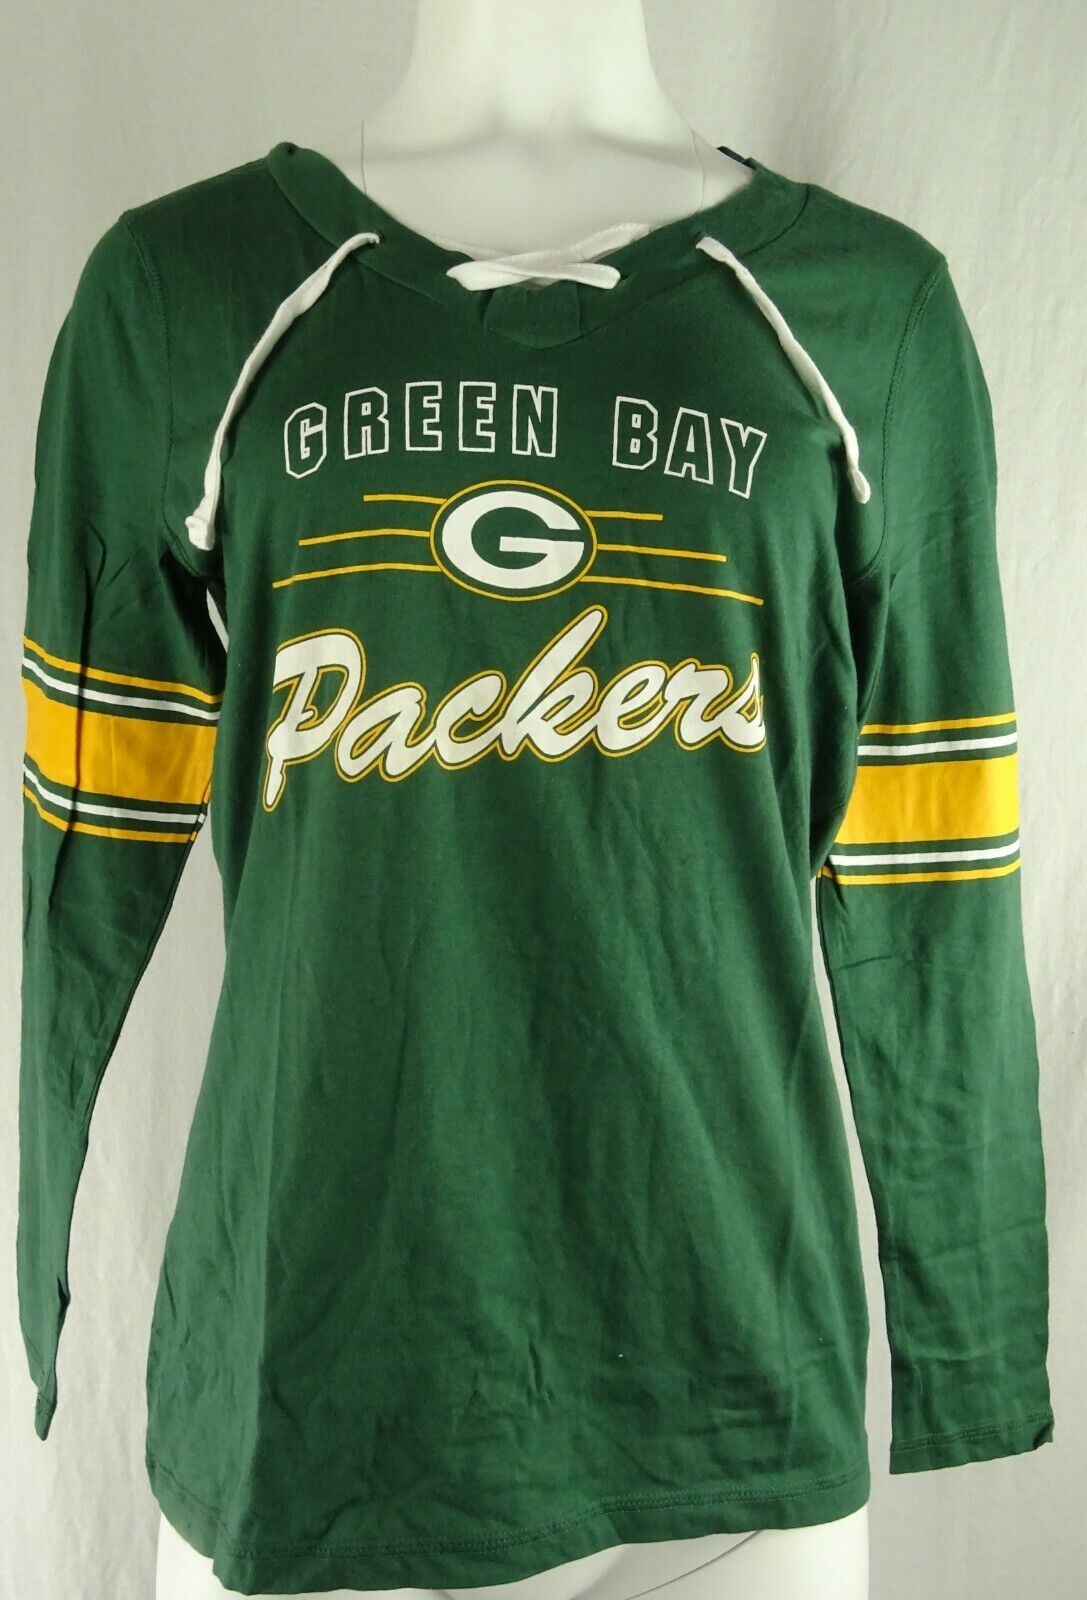 Green Bay Packers NFL Team Apparel Women's Lace-Up T-Shirt